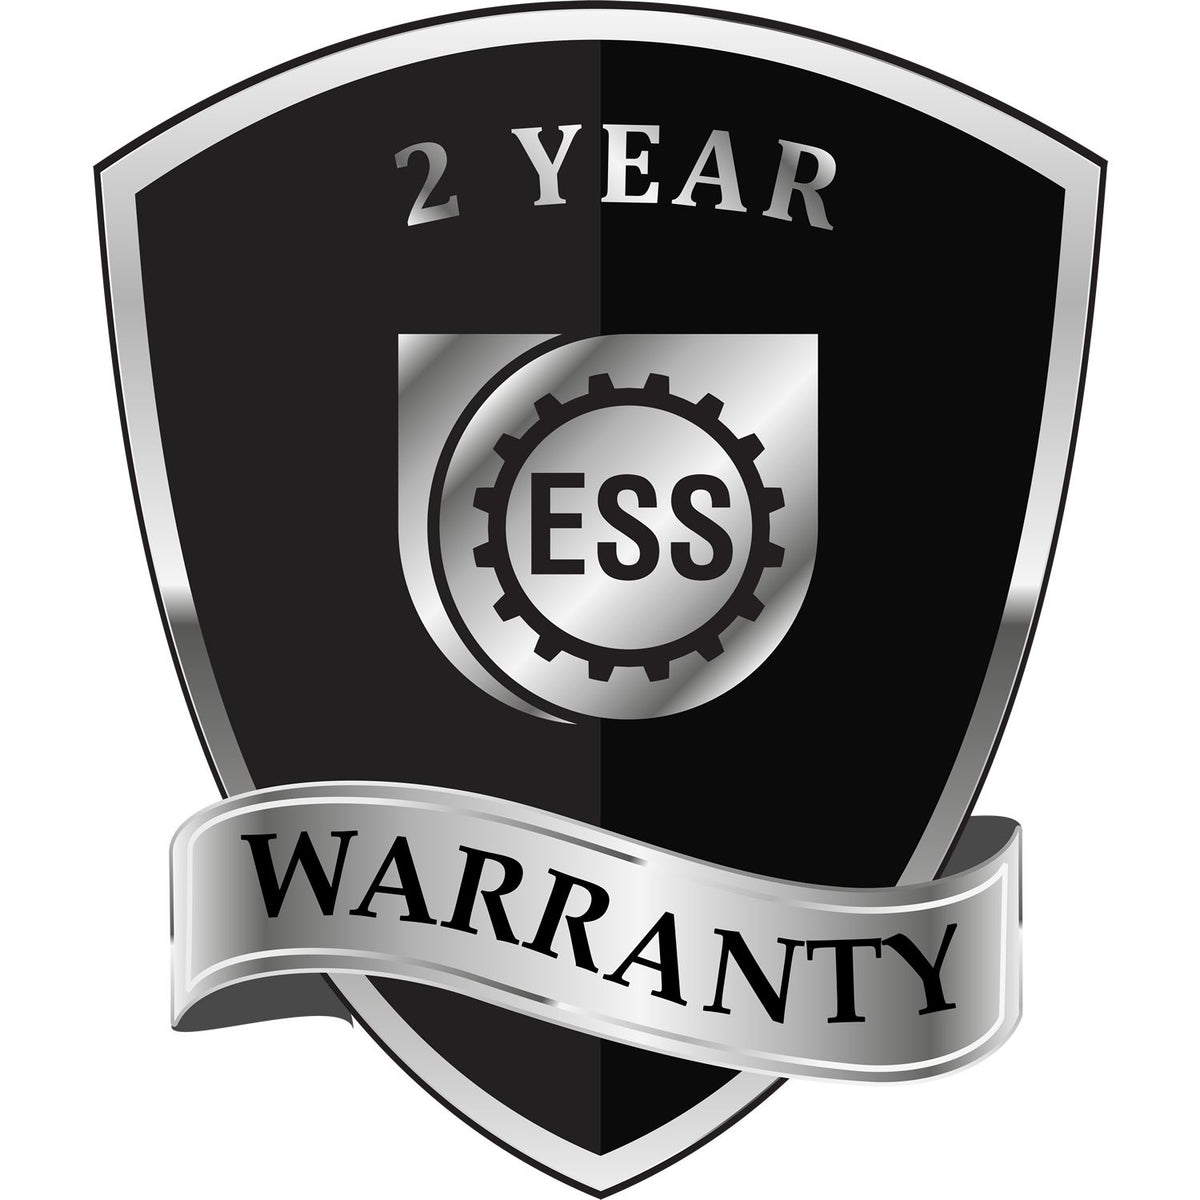 A black and silver badge or emblem showing warranty information for the Virginia Geologist Desk Seal